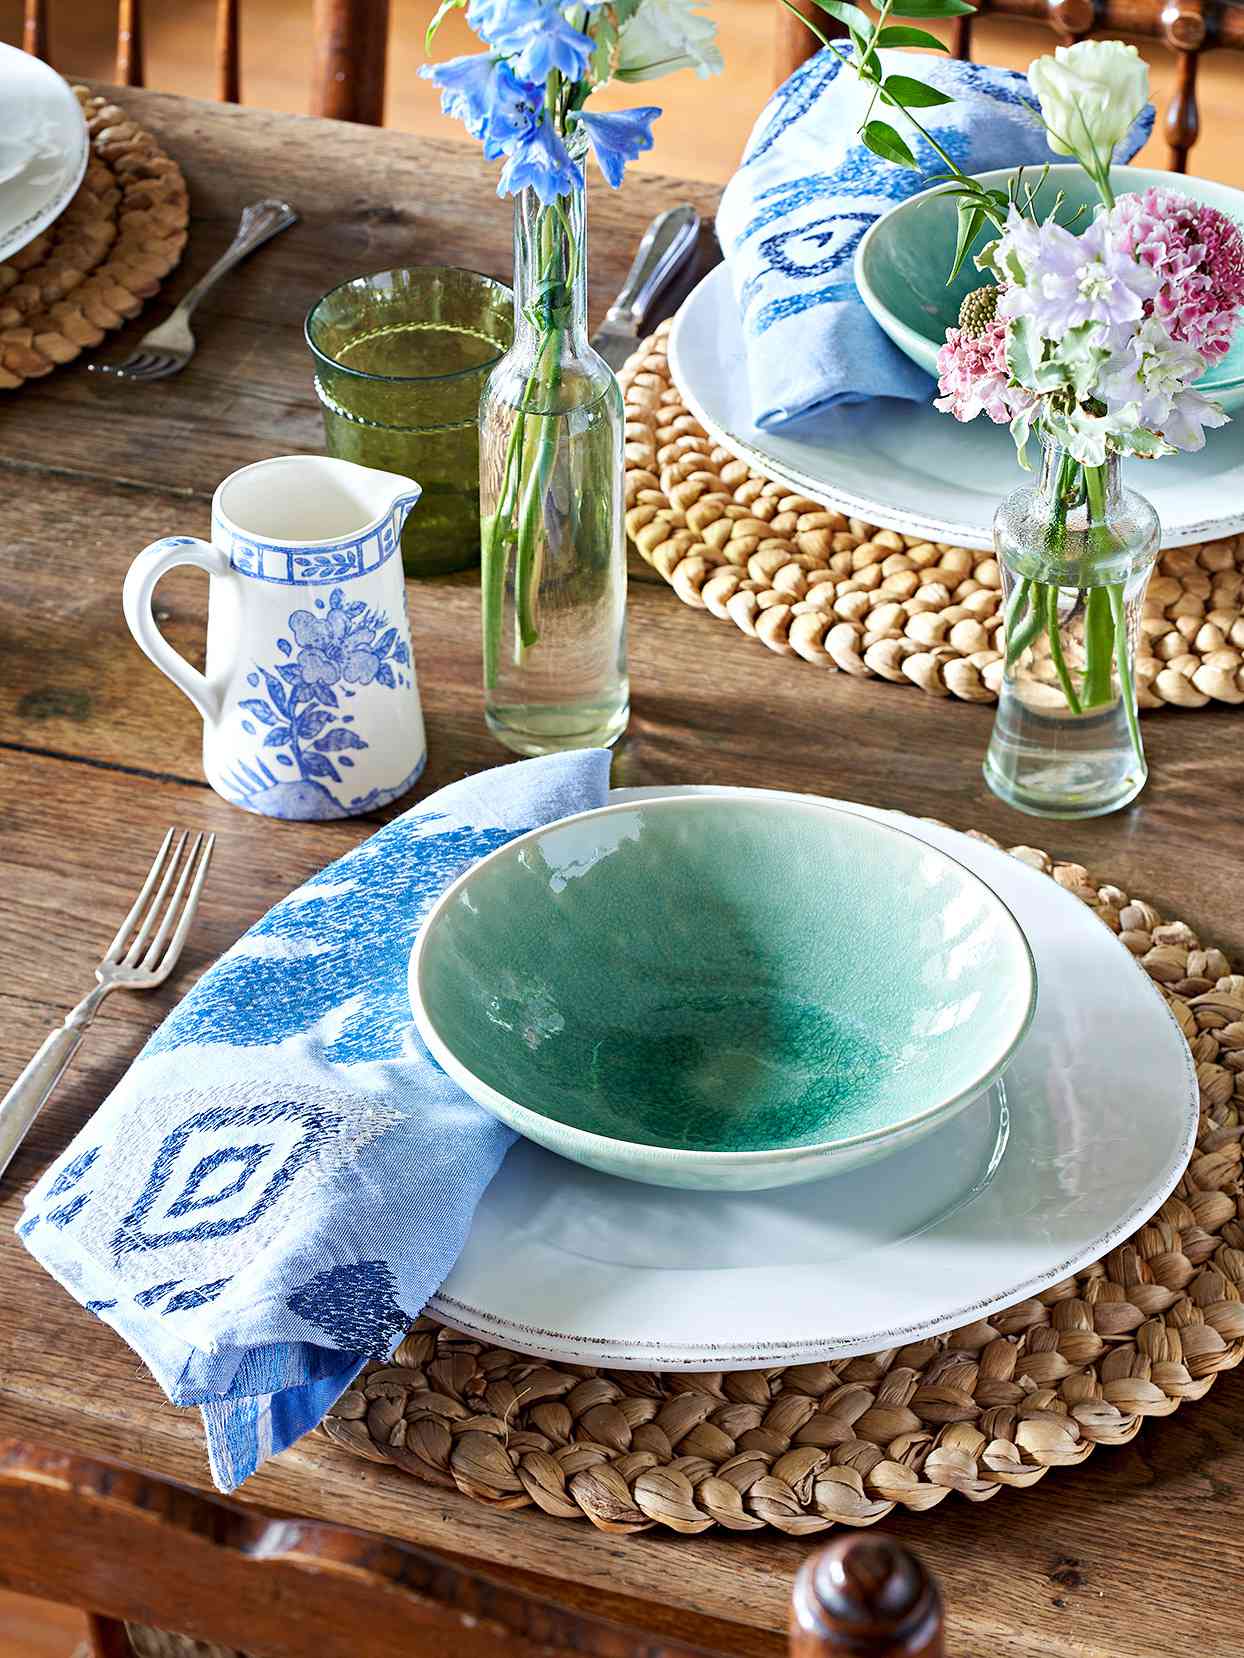 wood table setting green blue dishes china napkin charger bud vases place setting